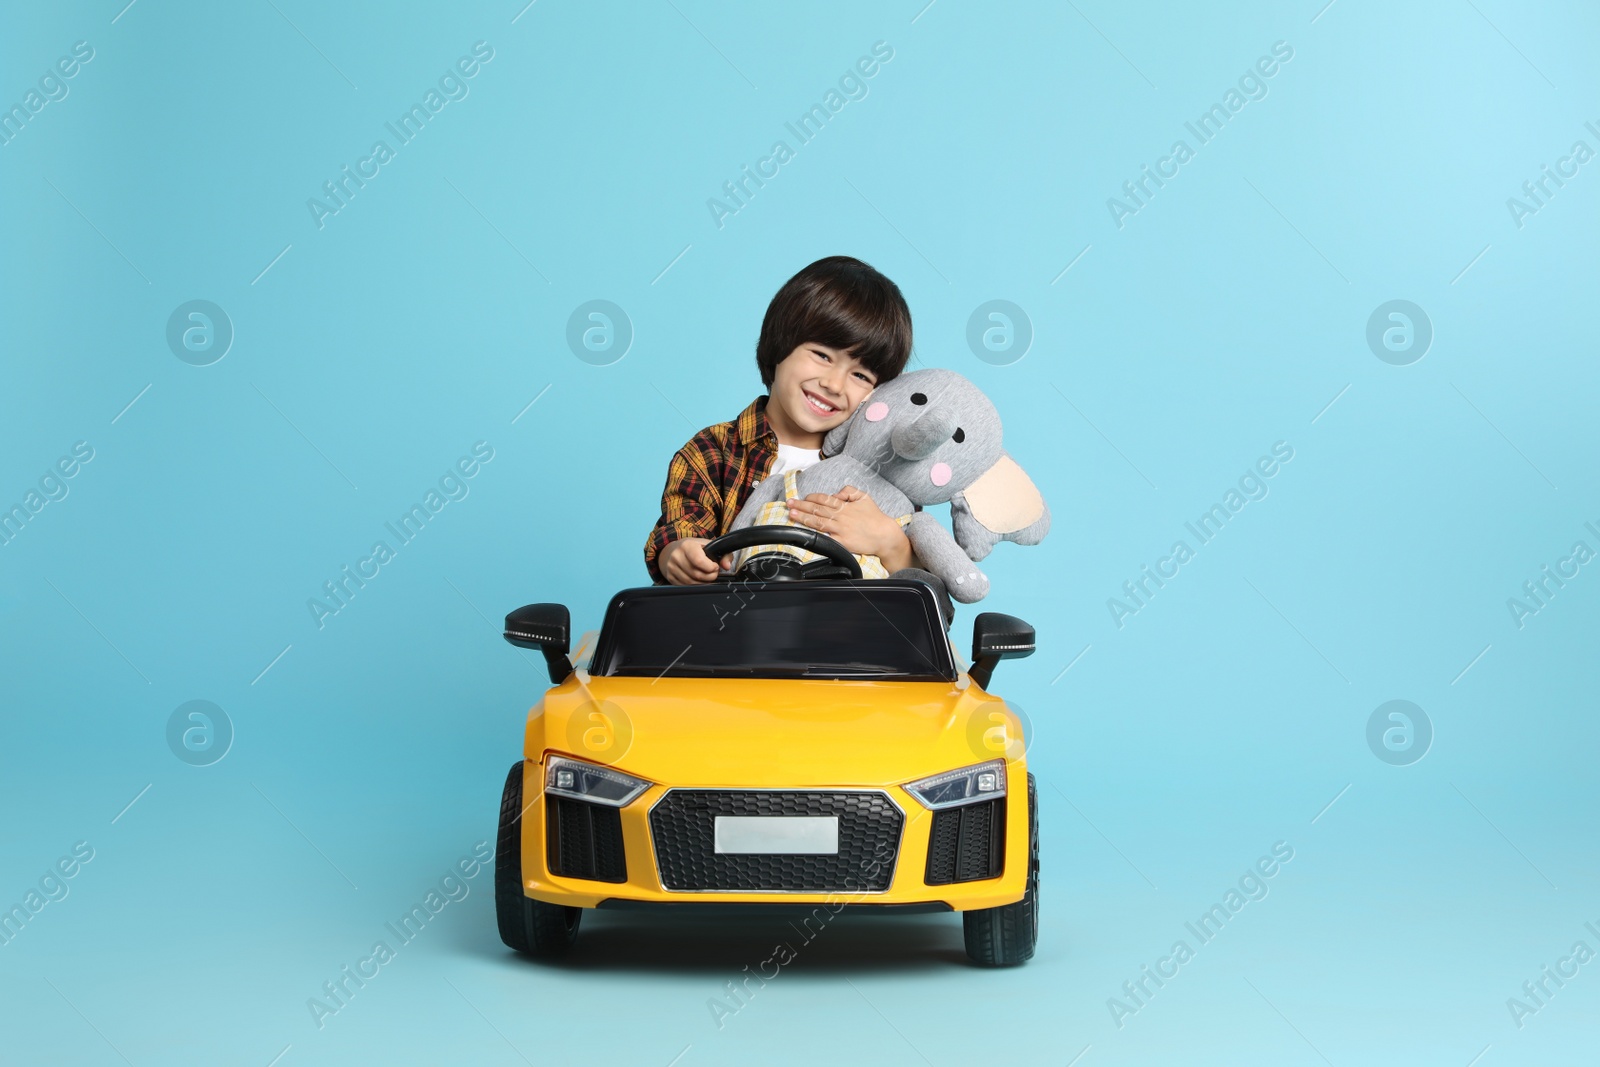 Photo of Little child with toy driving car on light blue background